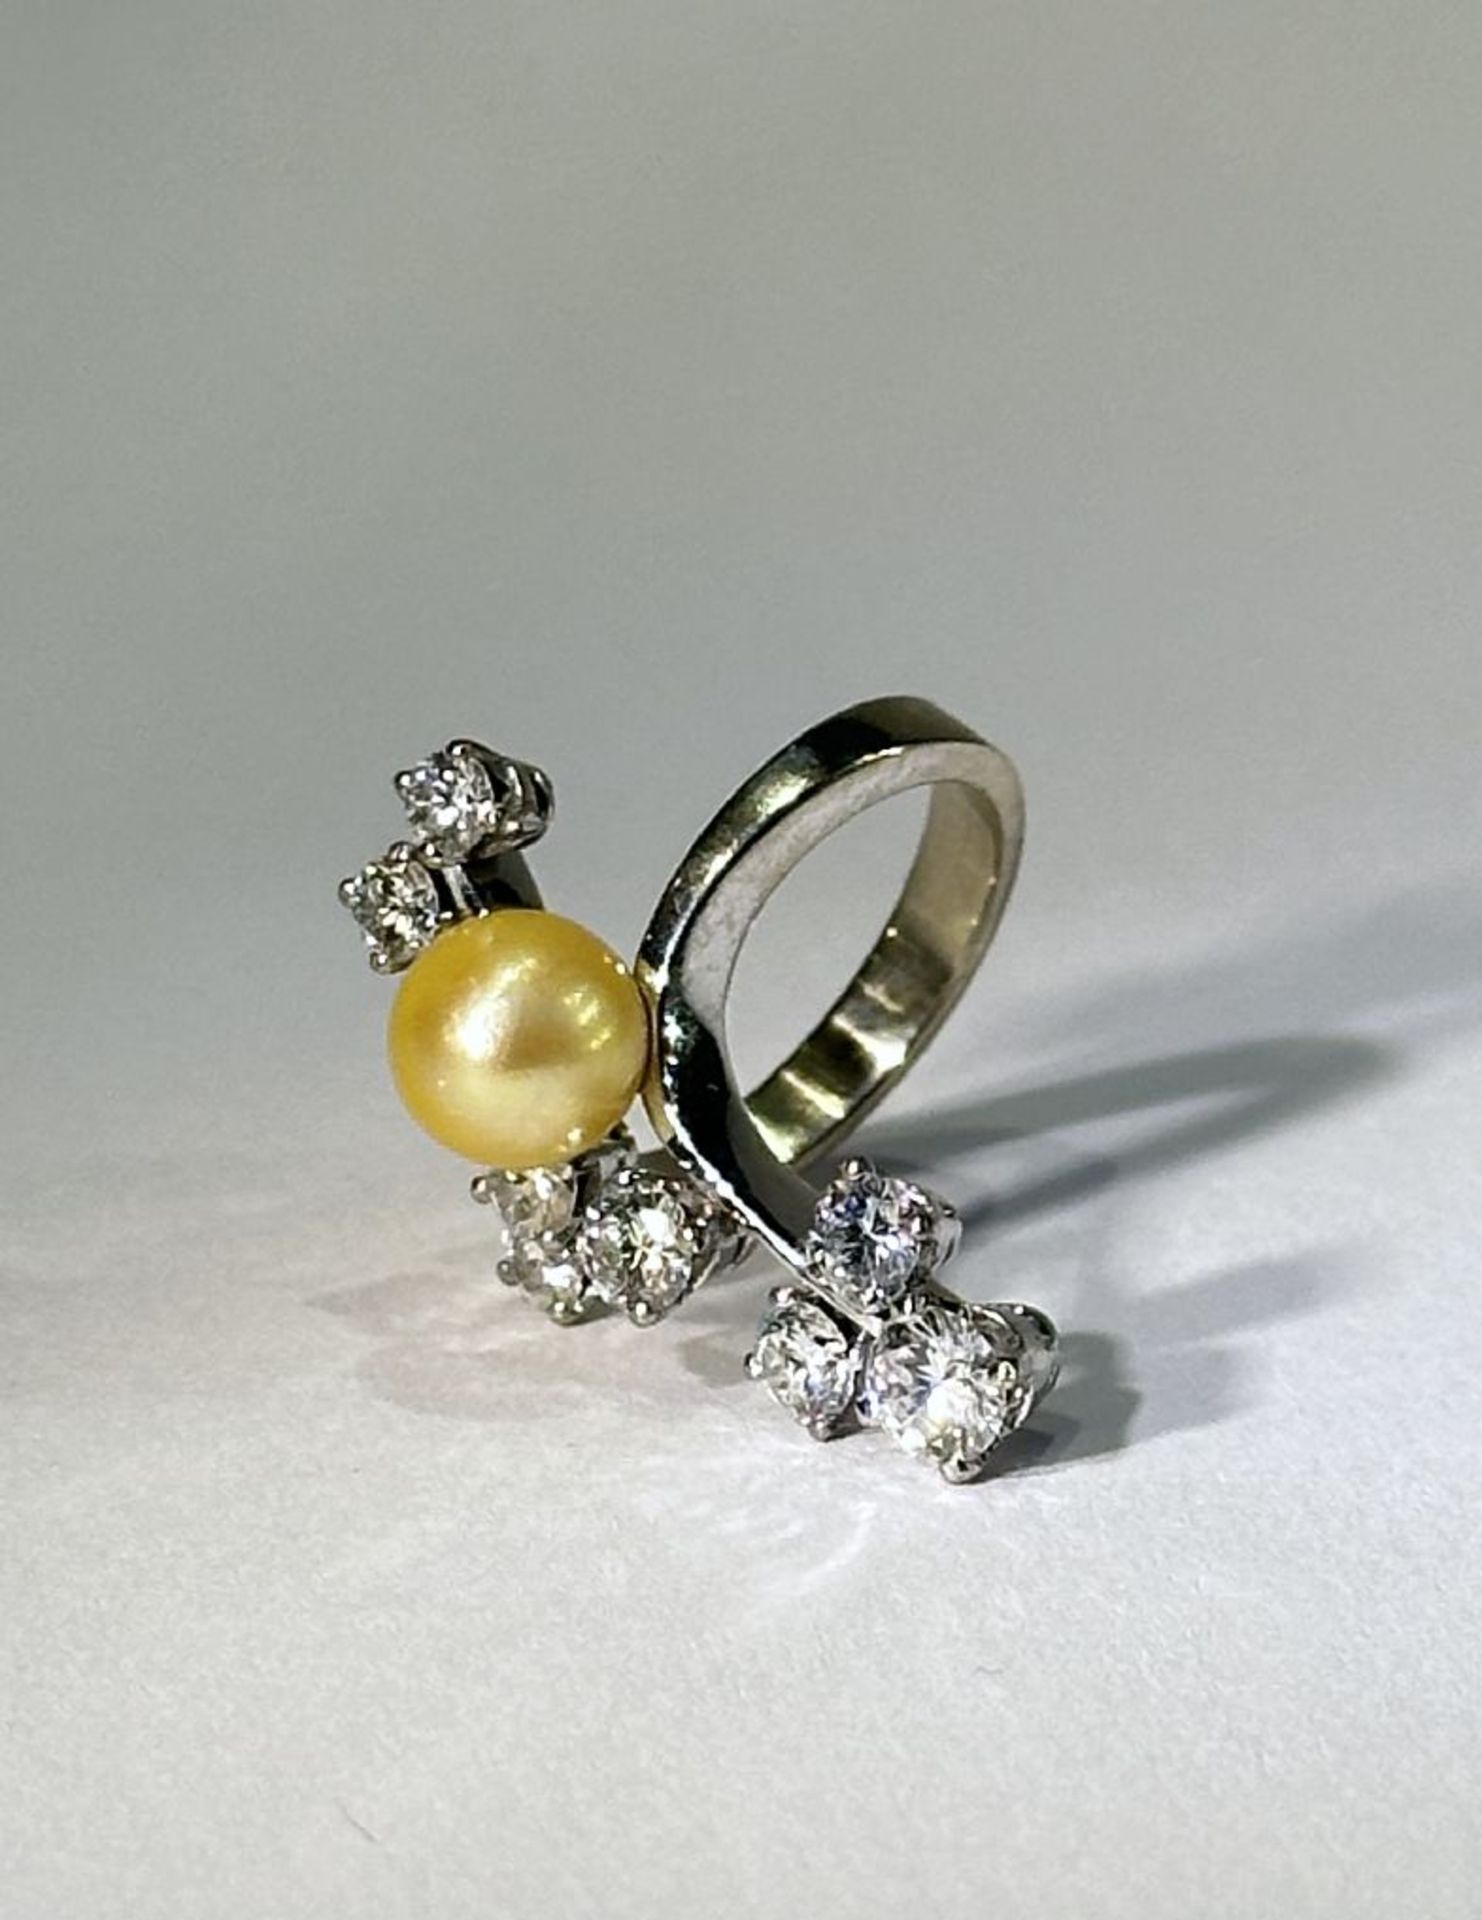 Ring with 8 brilliants and a pearl - Image 5 of 5